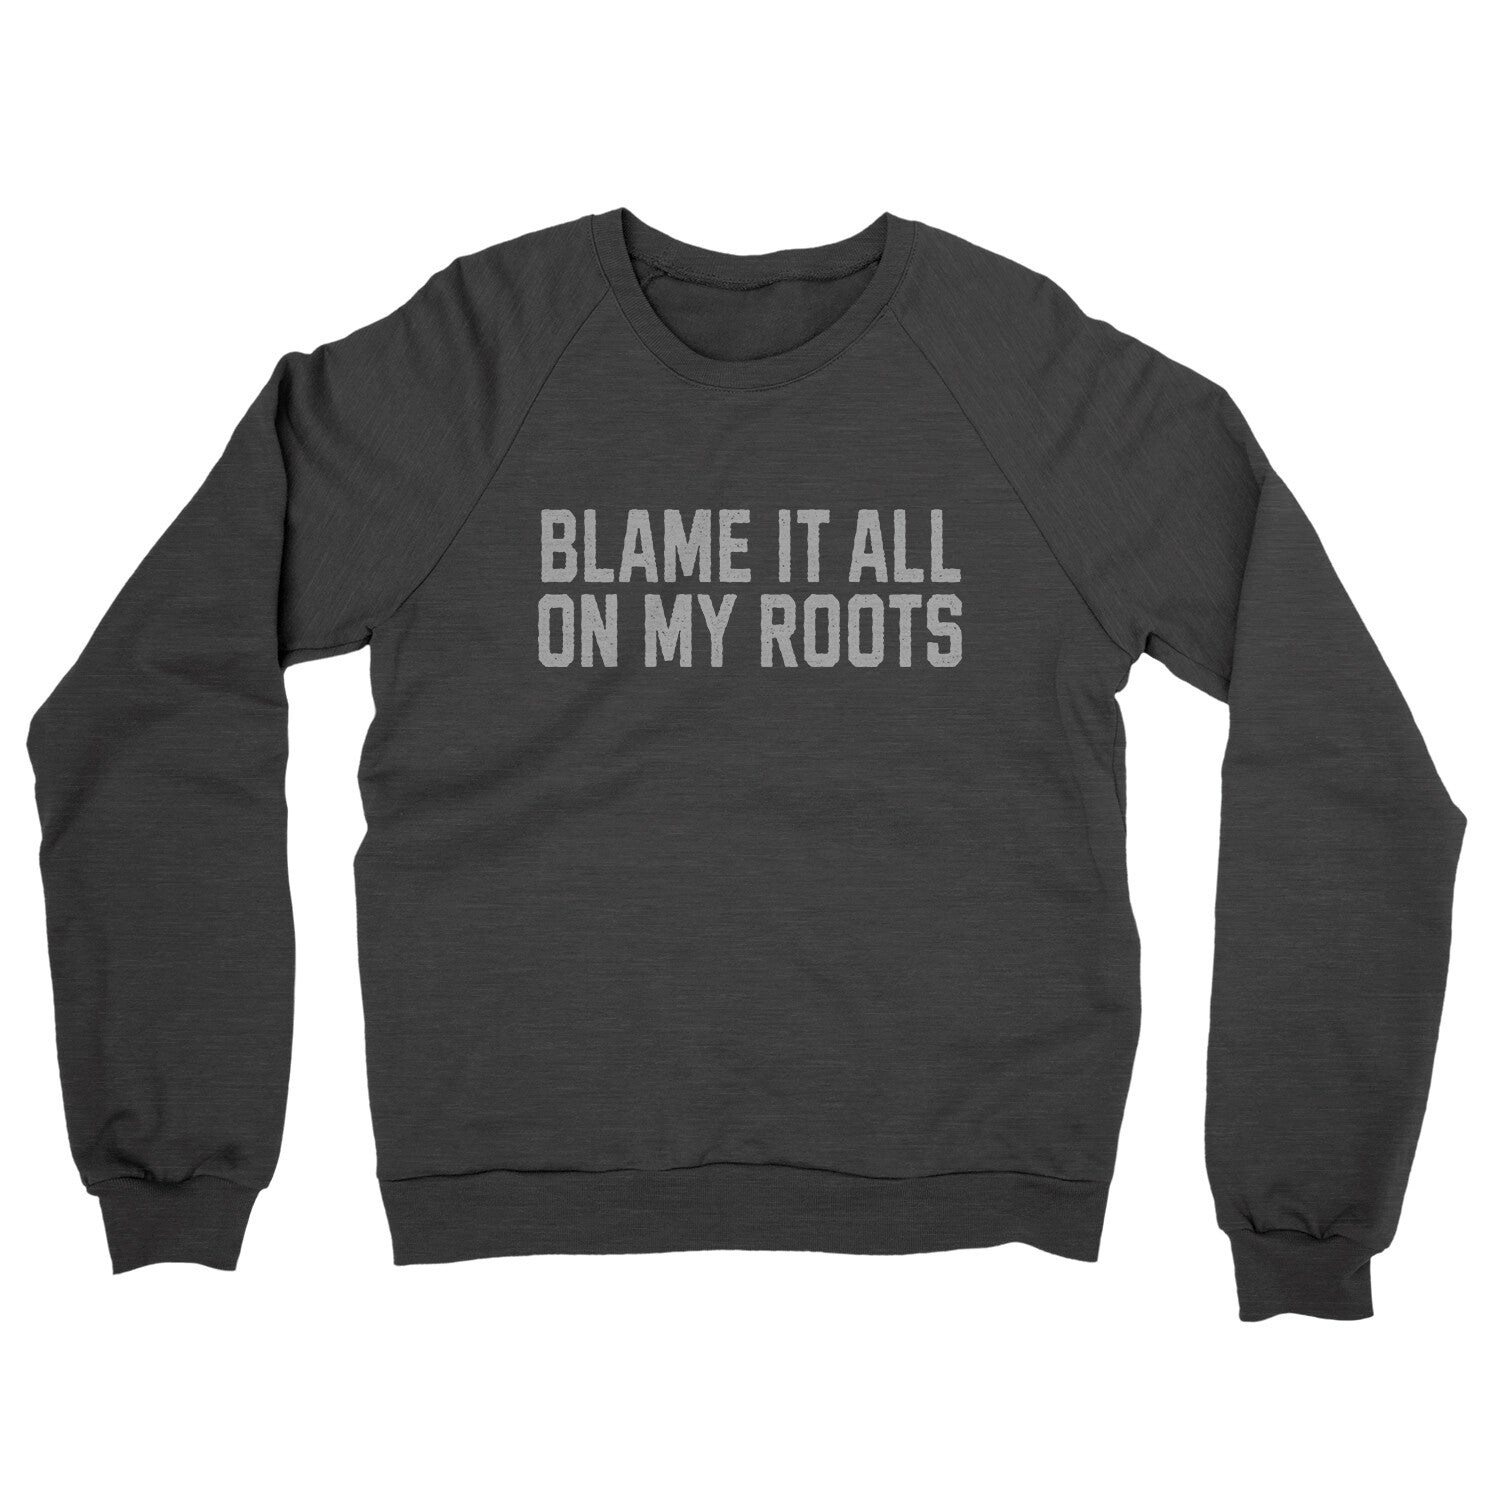 Blame it All on my Roots in Charcoal Heather Color